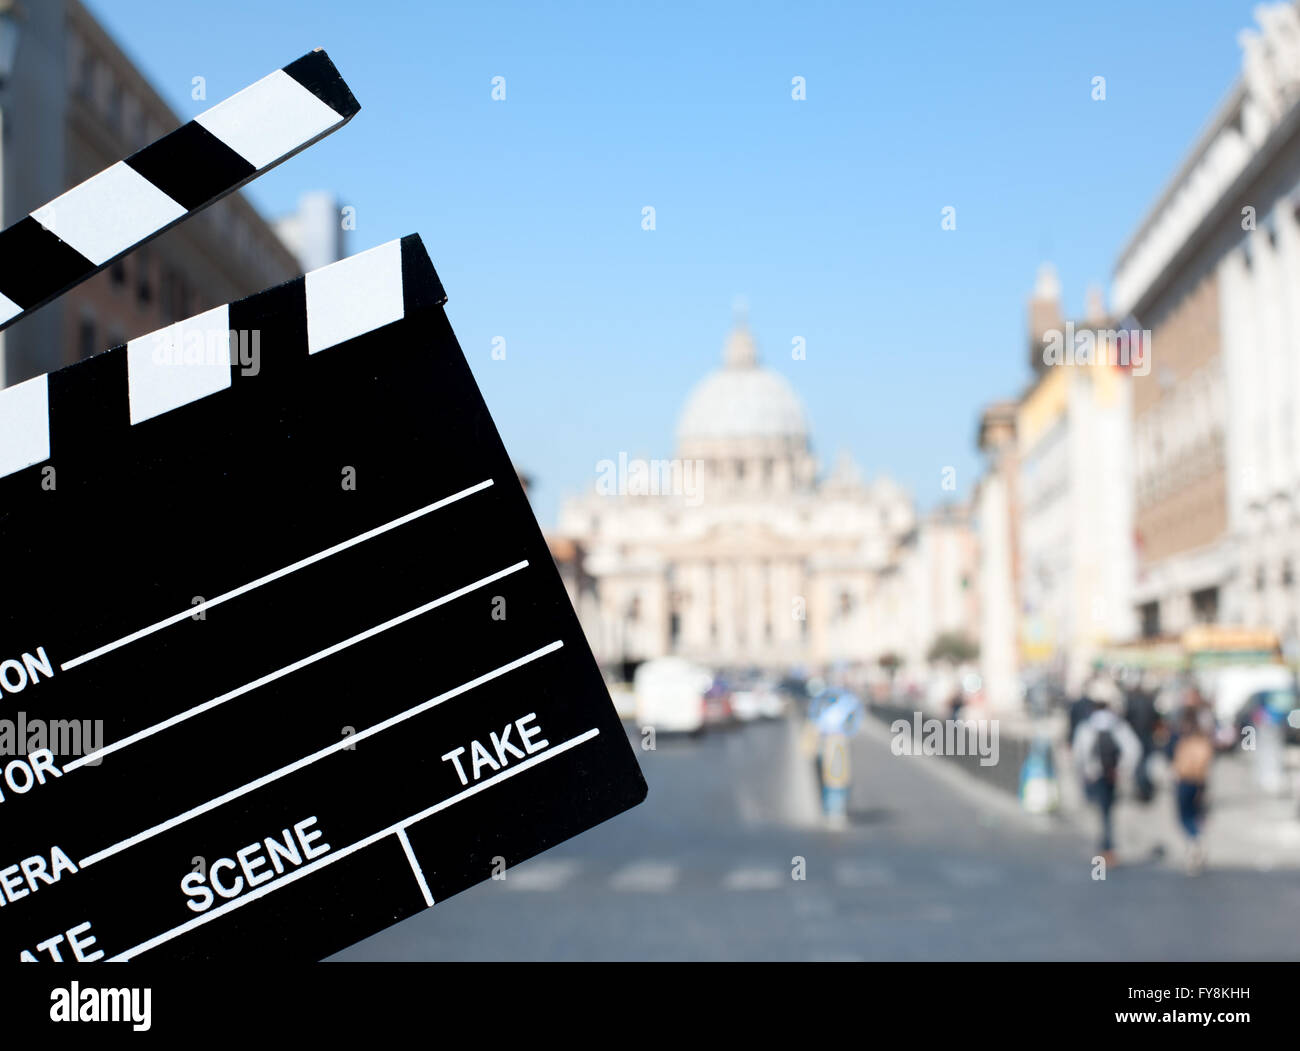 Movie clapper board with St Peter cathedral view out of focus in background Stock Photo